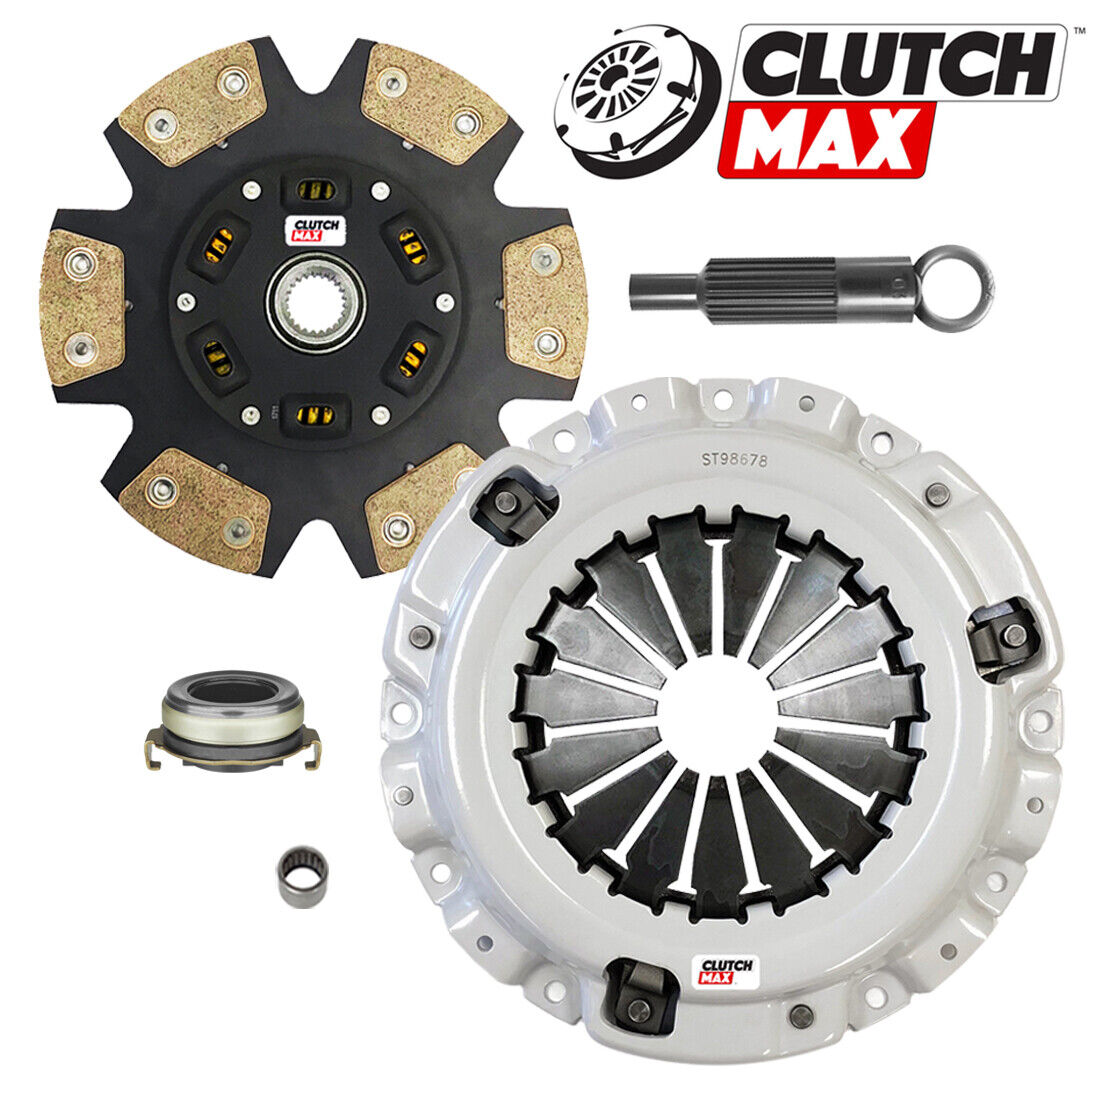 CM STAGE 3 RACING PERFORMANCE CLUTCH KIT fits 2004-2011 MAZDA RX8 RX-8 *6-SPEED*